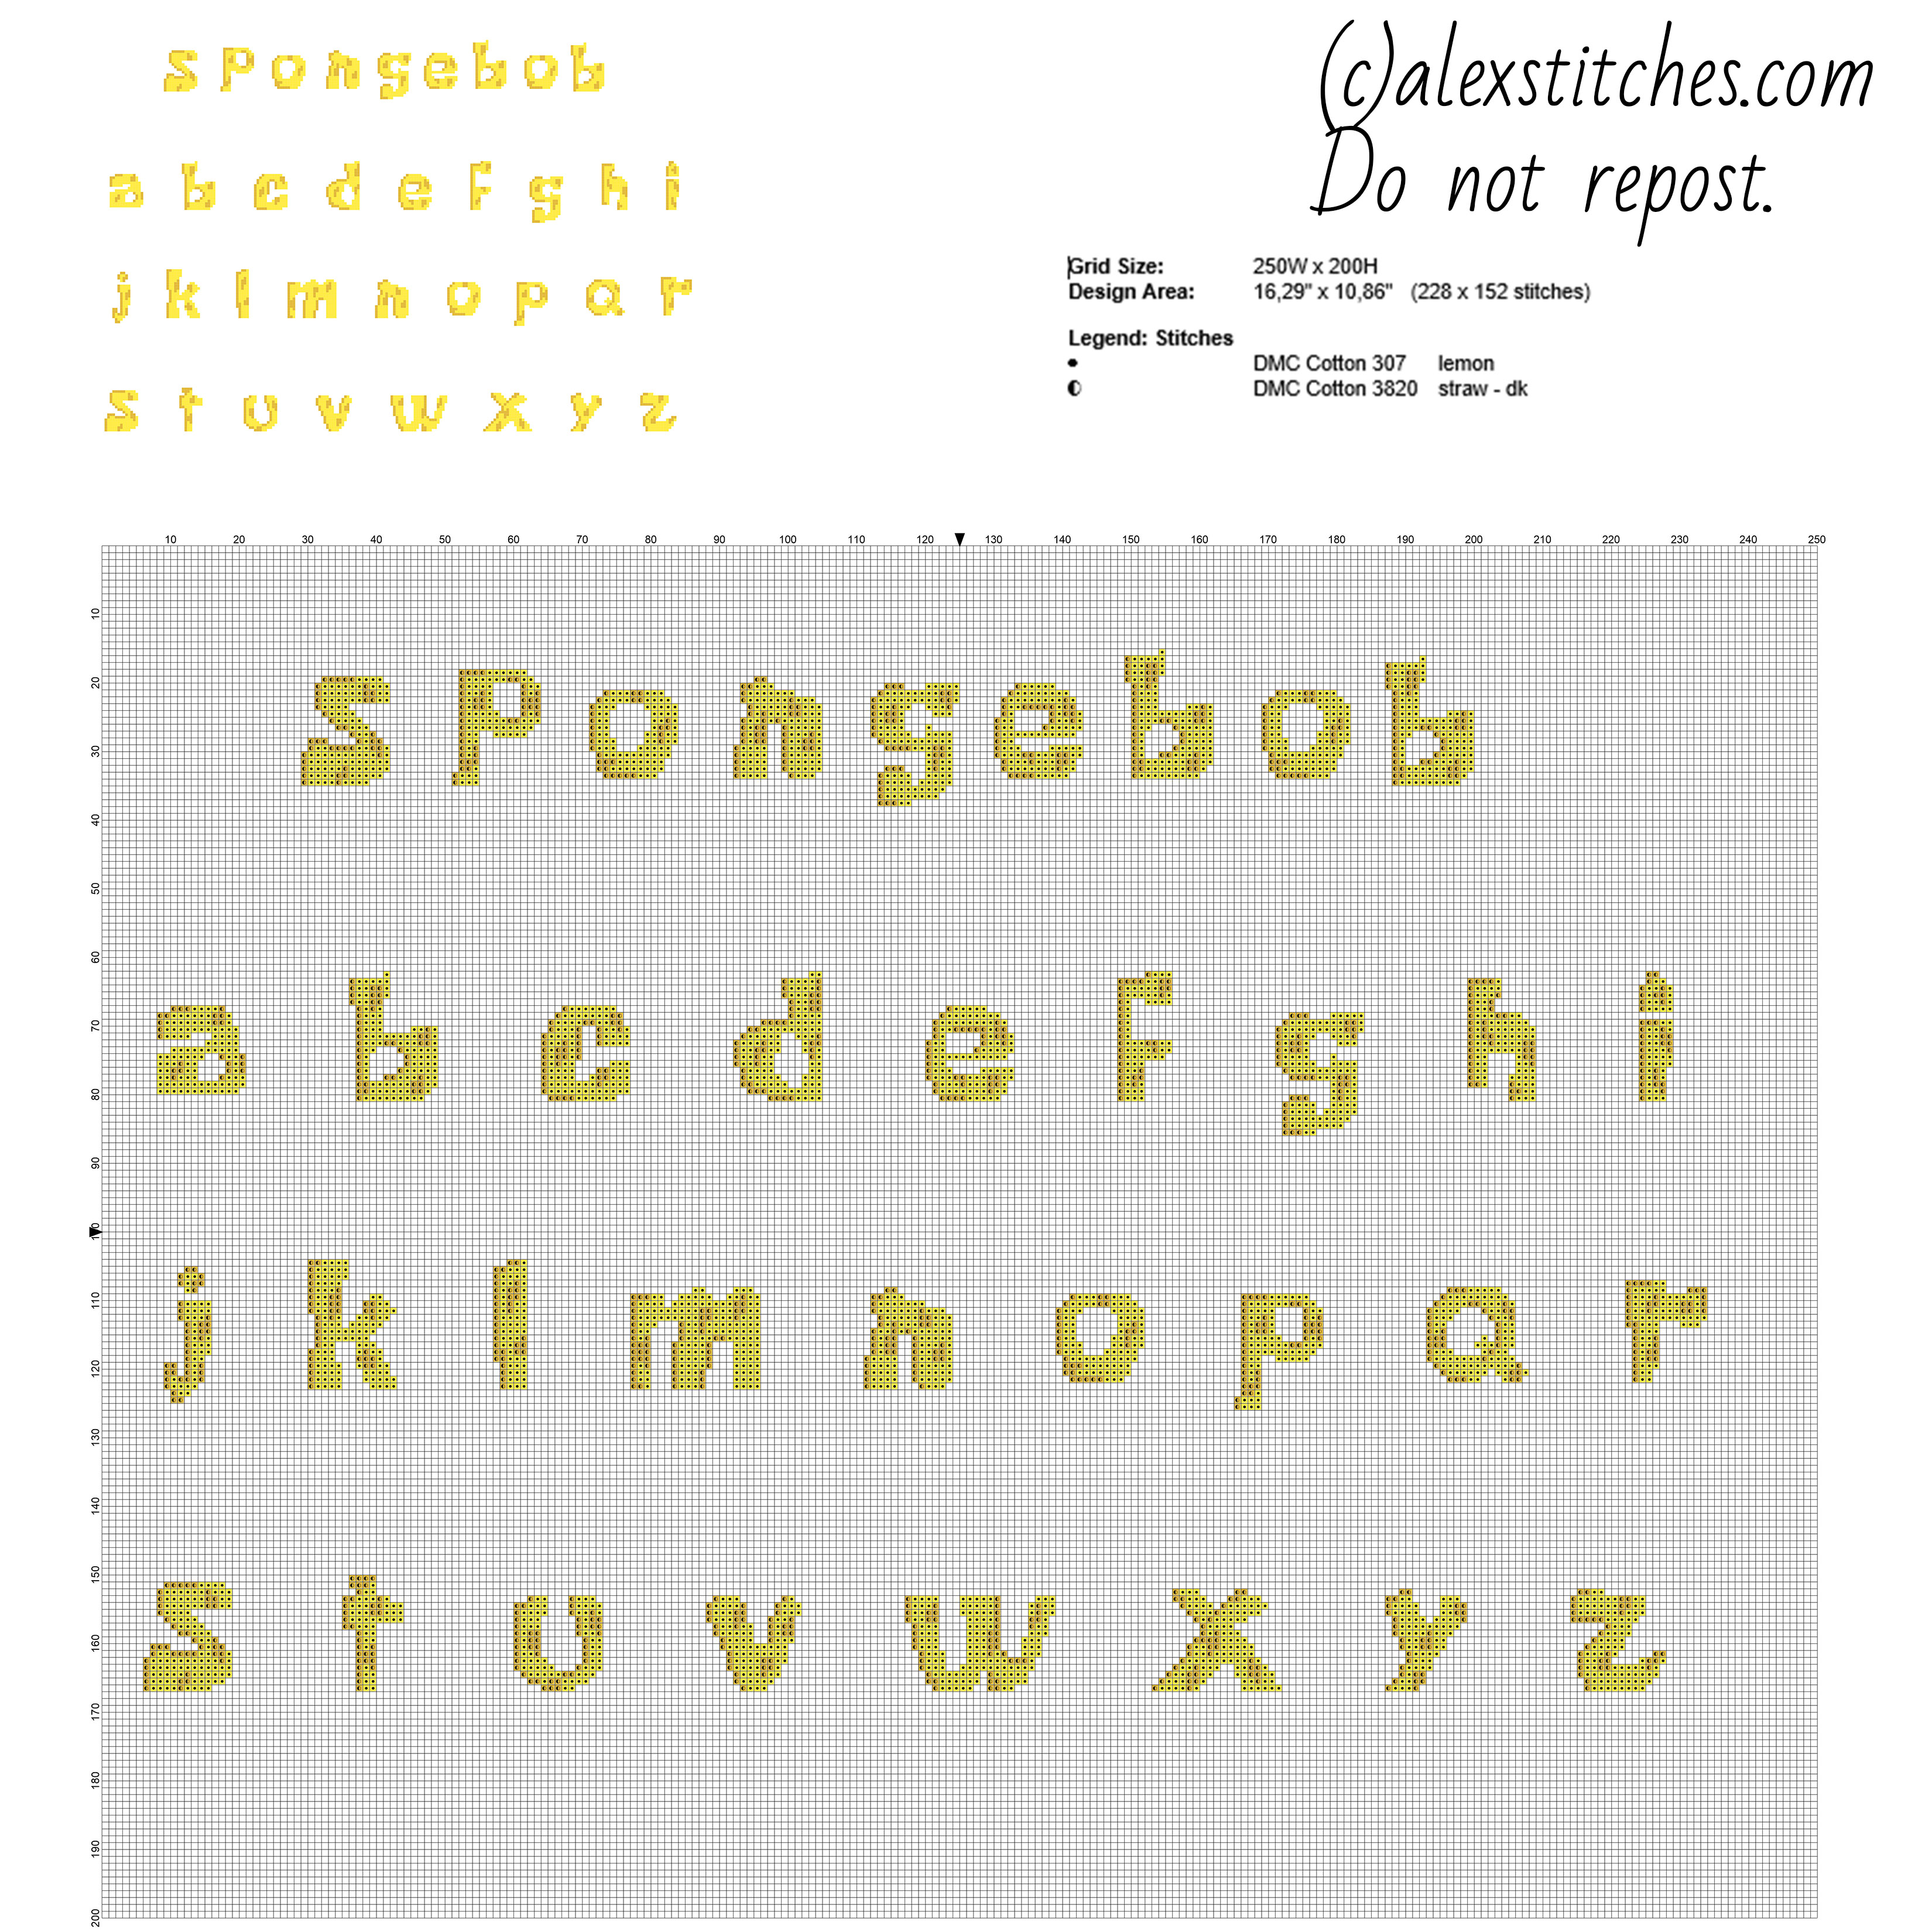 Spongebob Squarepants cross stitch alphabet lowercase letters free download made with PcStitch software